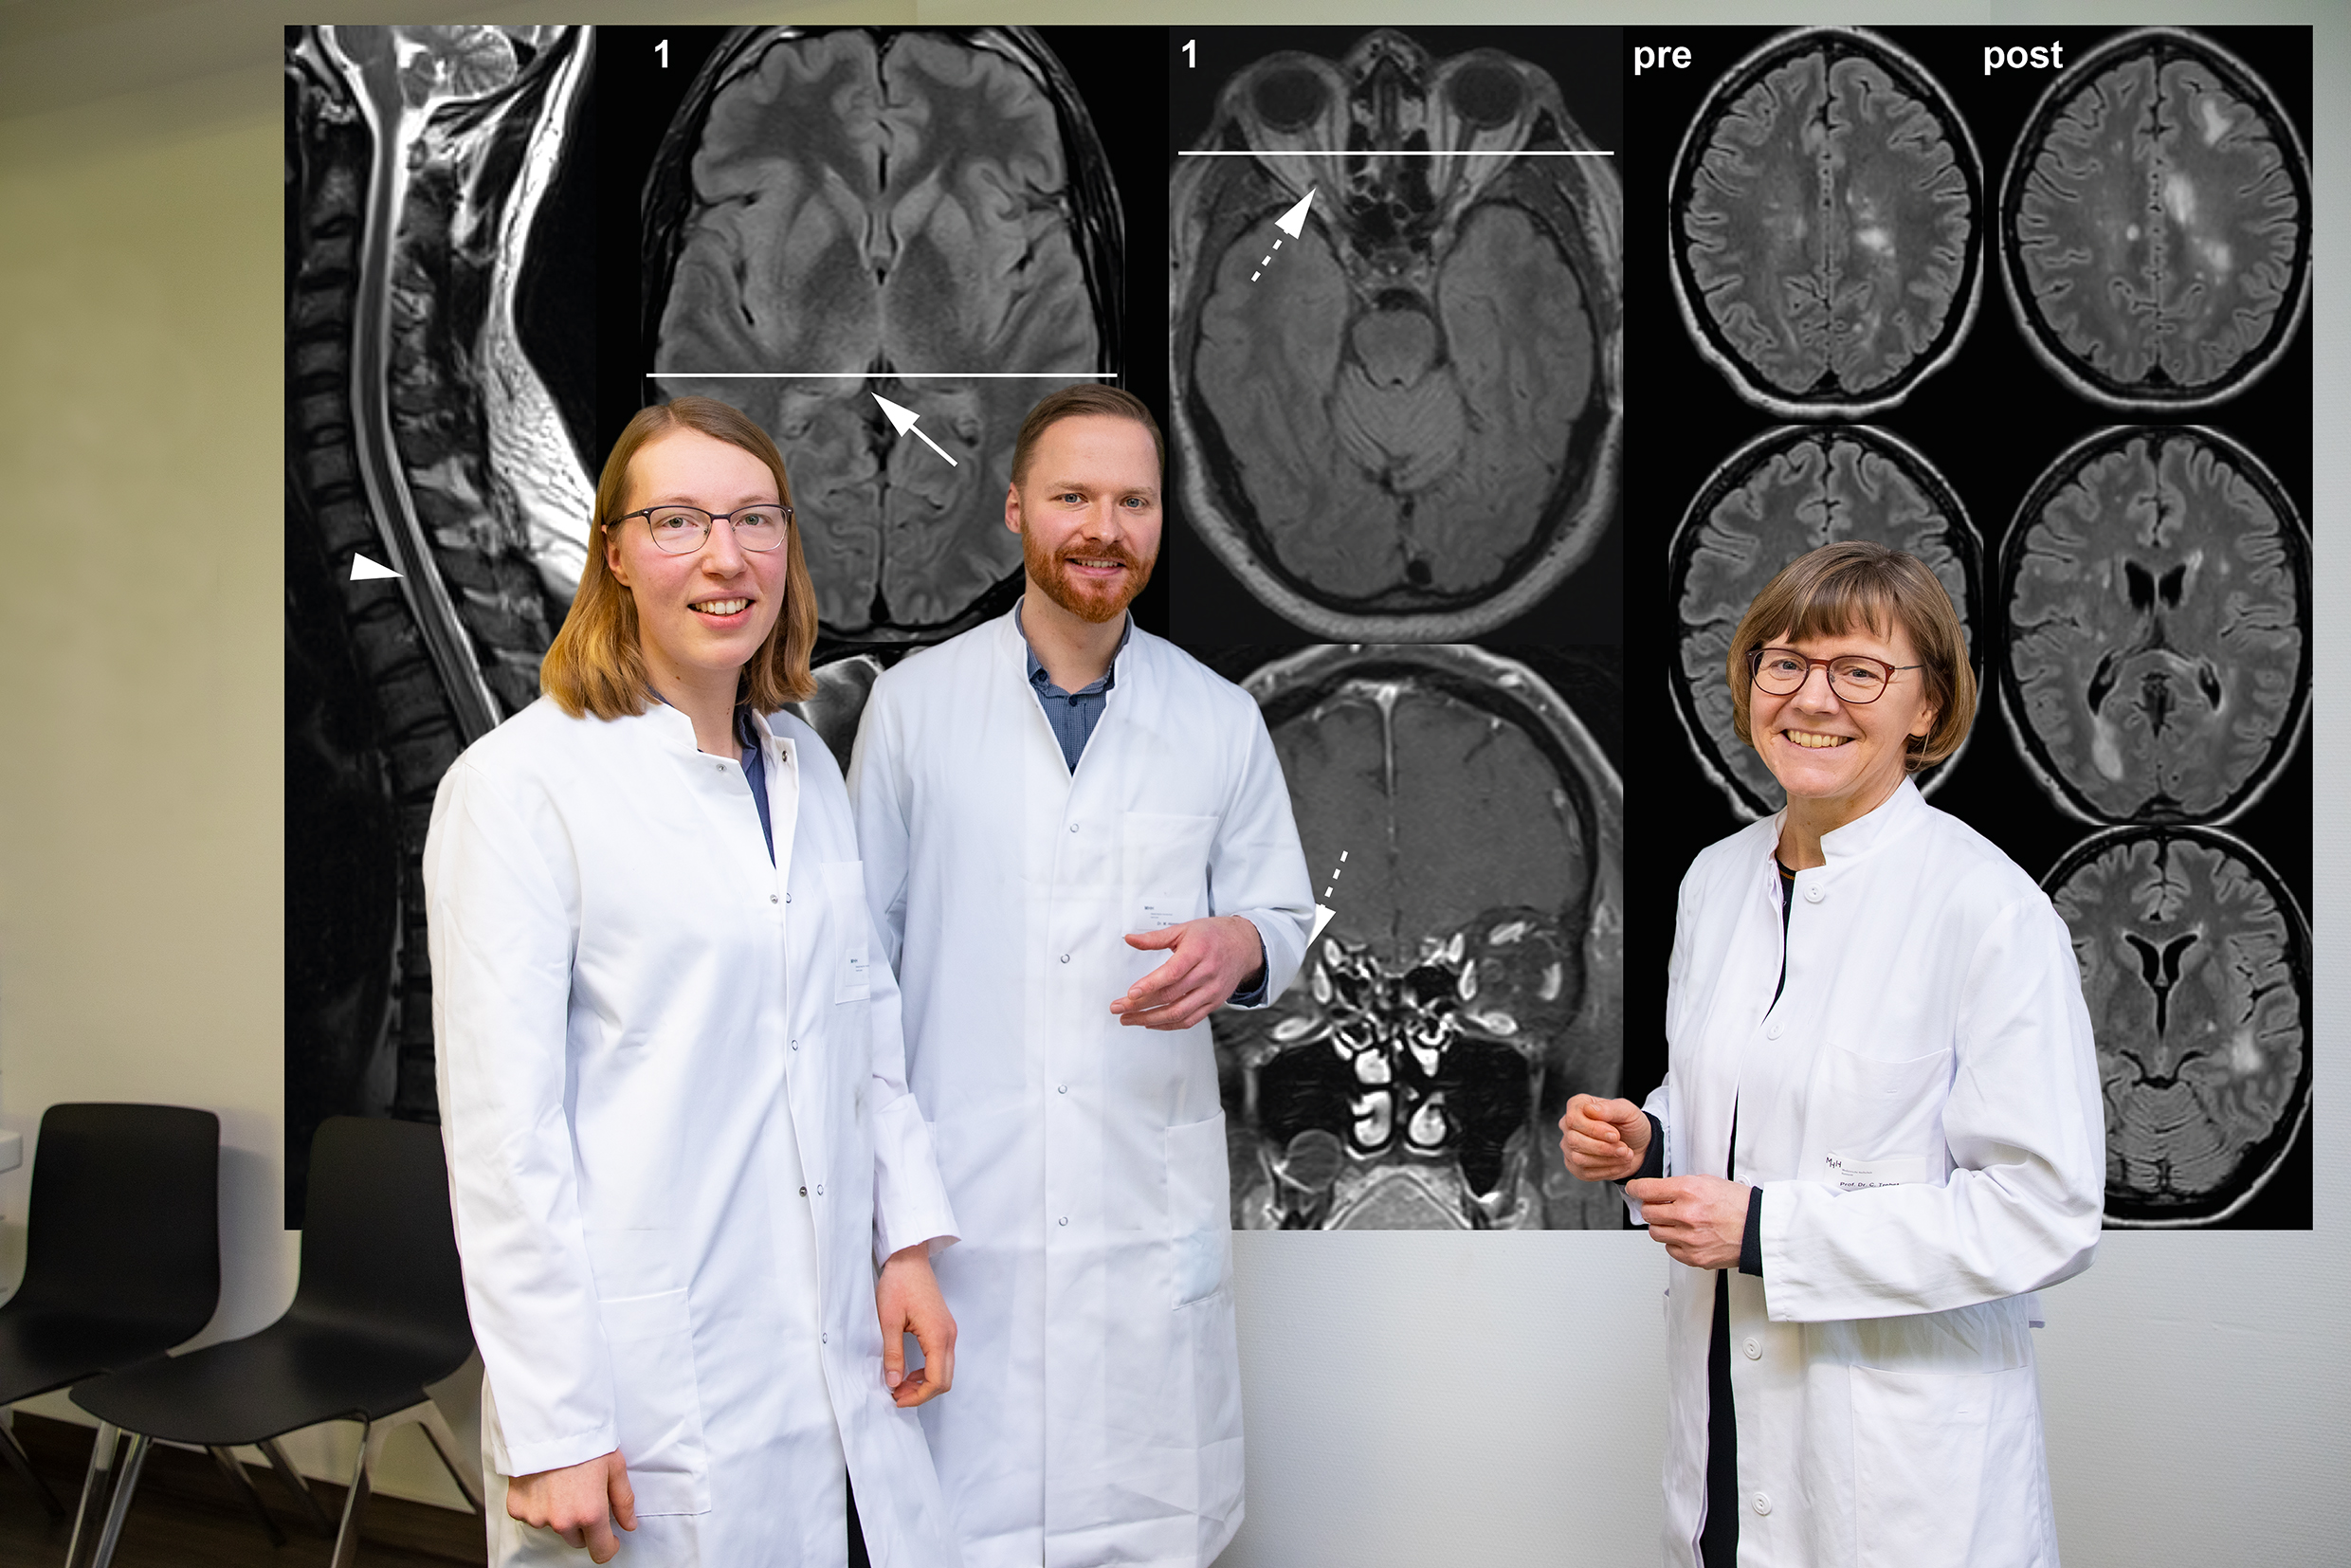 Franziska Bütow, Dr. Hümmert and Professor Trebst, all three in white coats, stand in front of a large image of the brain.